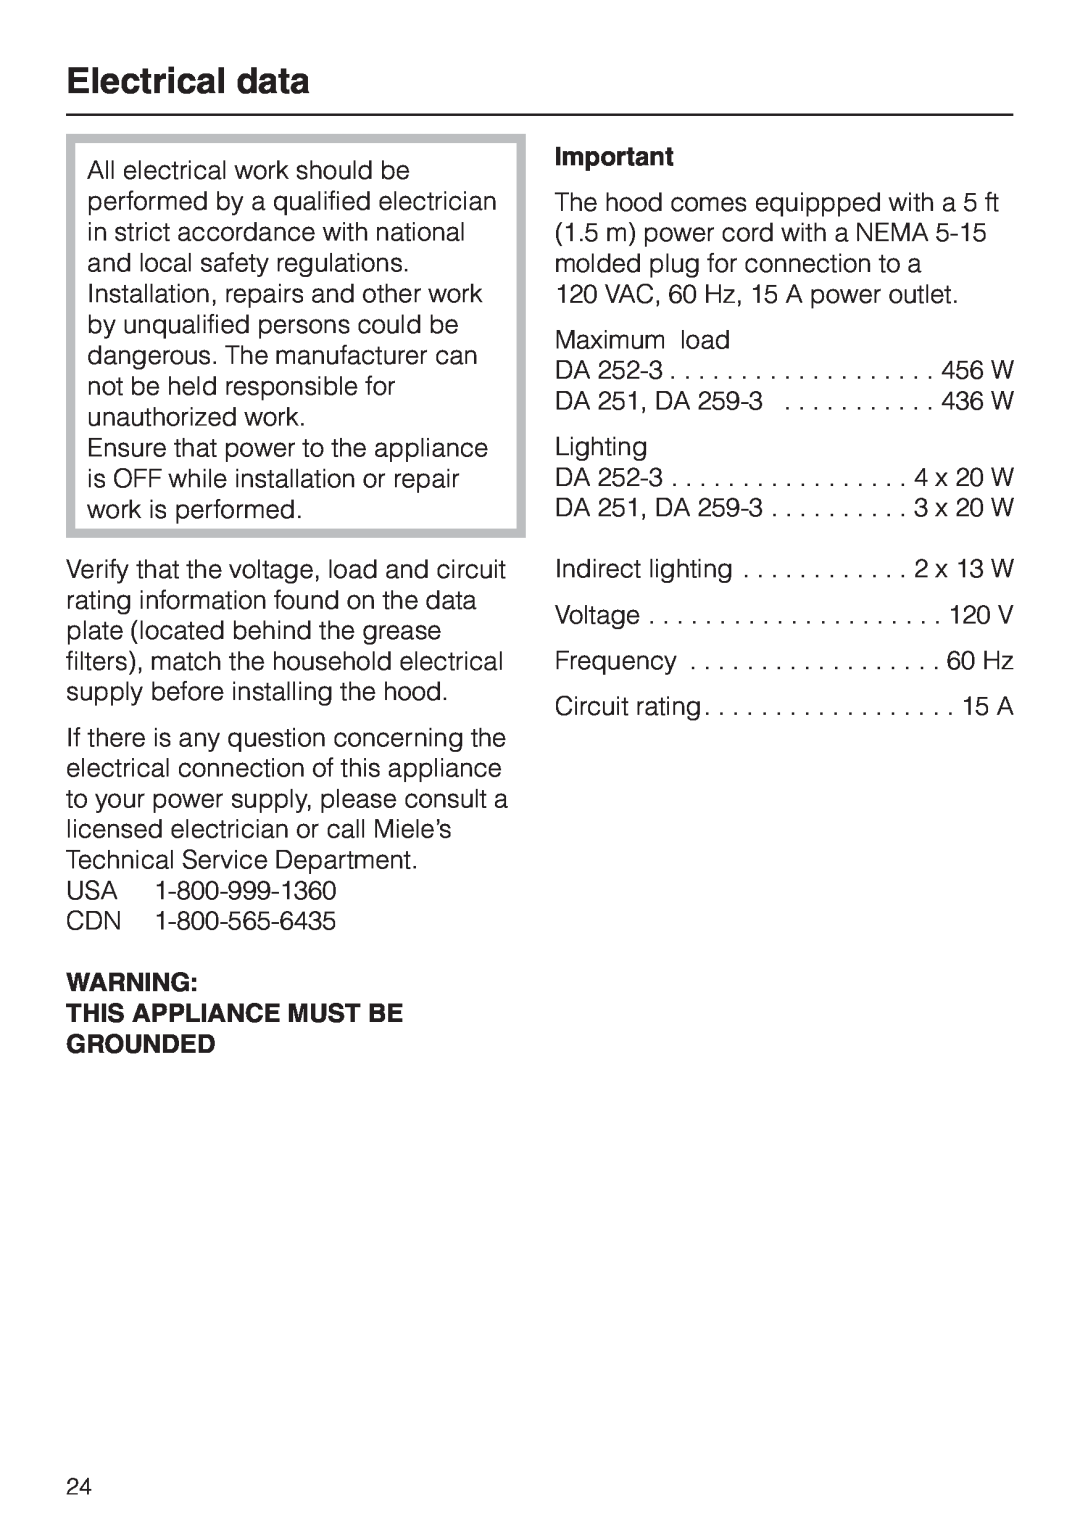 Miele DA259-3, DA252-3, DA 251 installation instructions Electrical data, This Appliance Must Be Grounded 